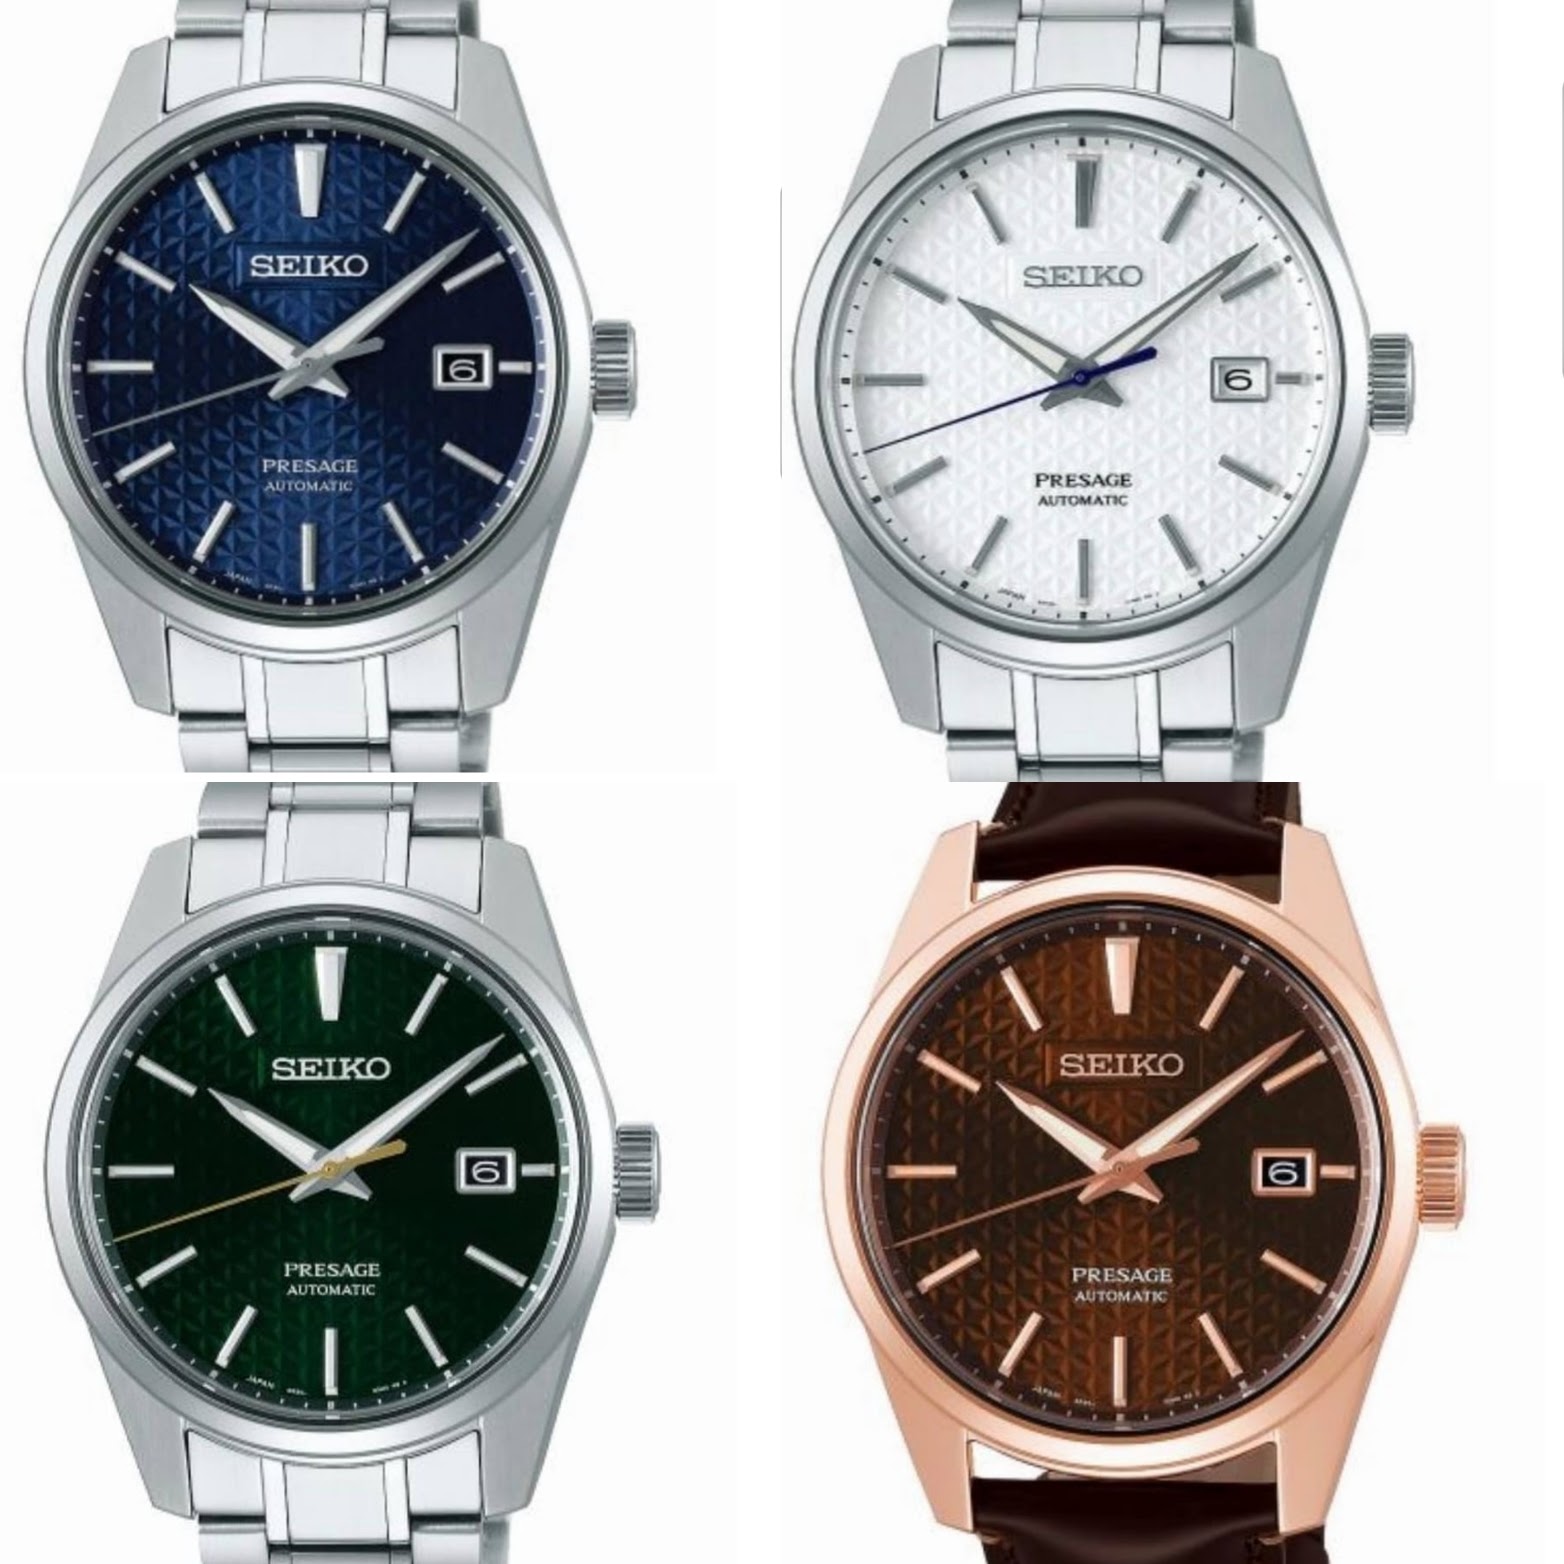 NEW and UPCOMING Seiko watches** | Page 837 | WatchUSeek Watch Forums